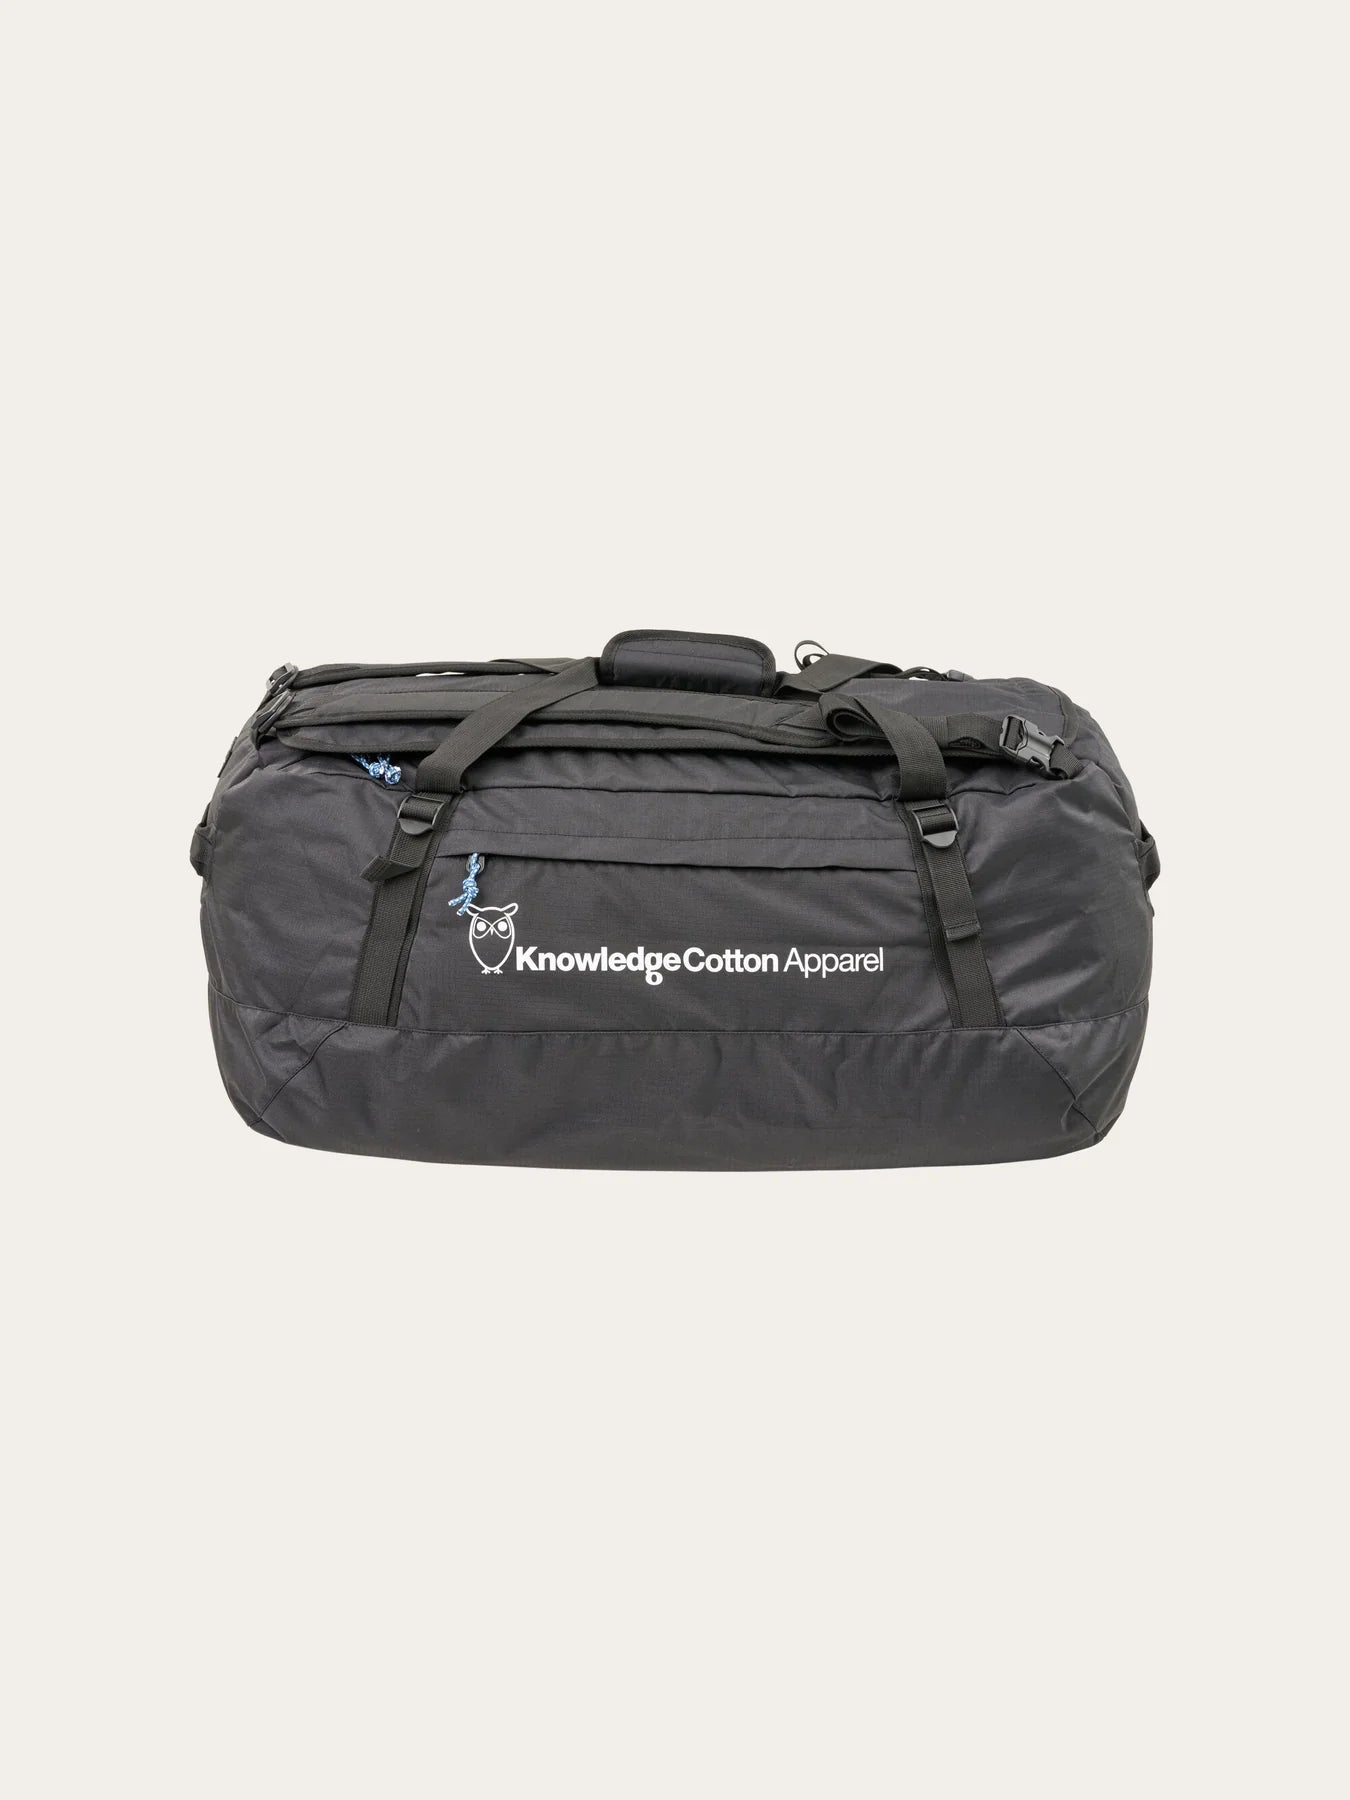 KnowledgeCotton Apparel Packable Duffel Backpack 50L - Recycled PET Black Jet Bags